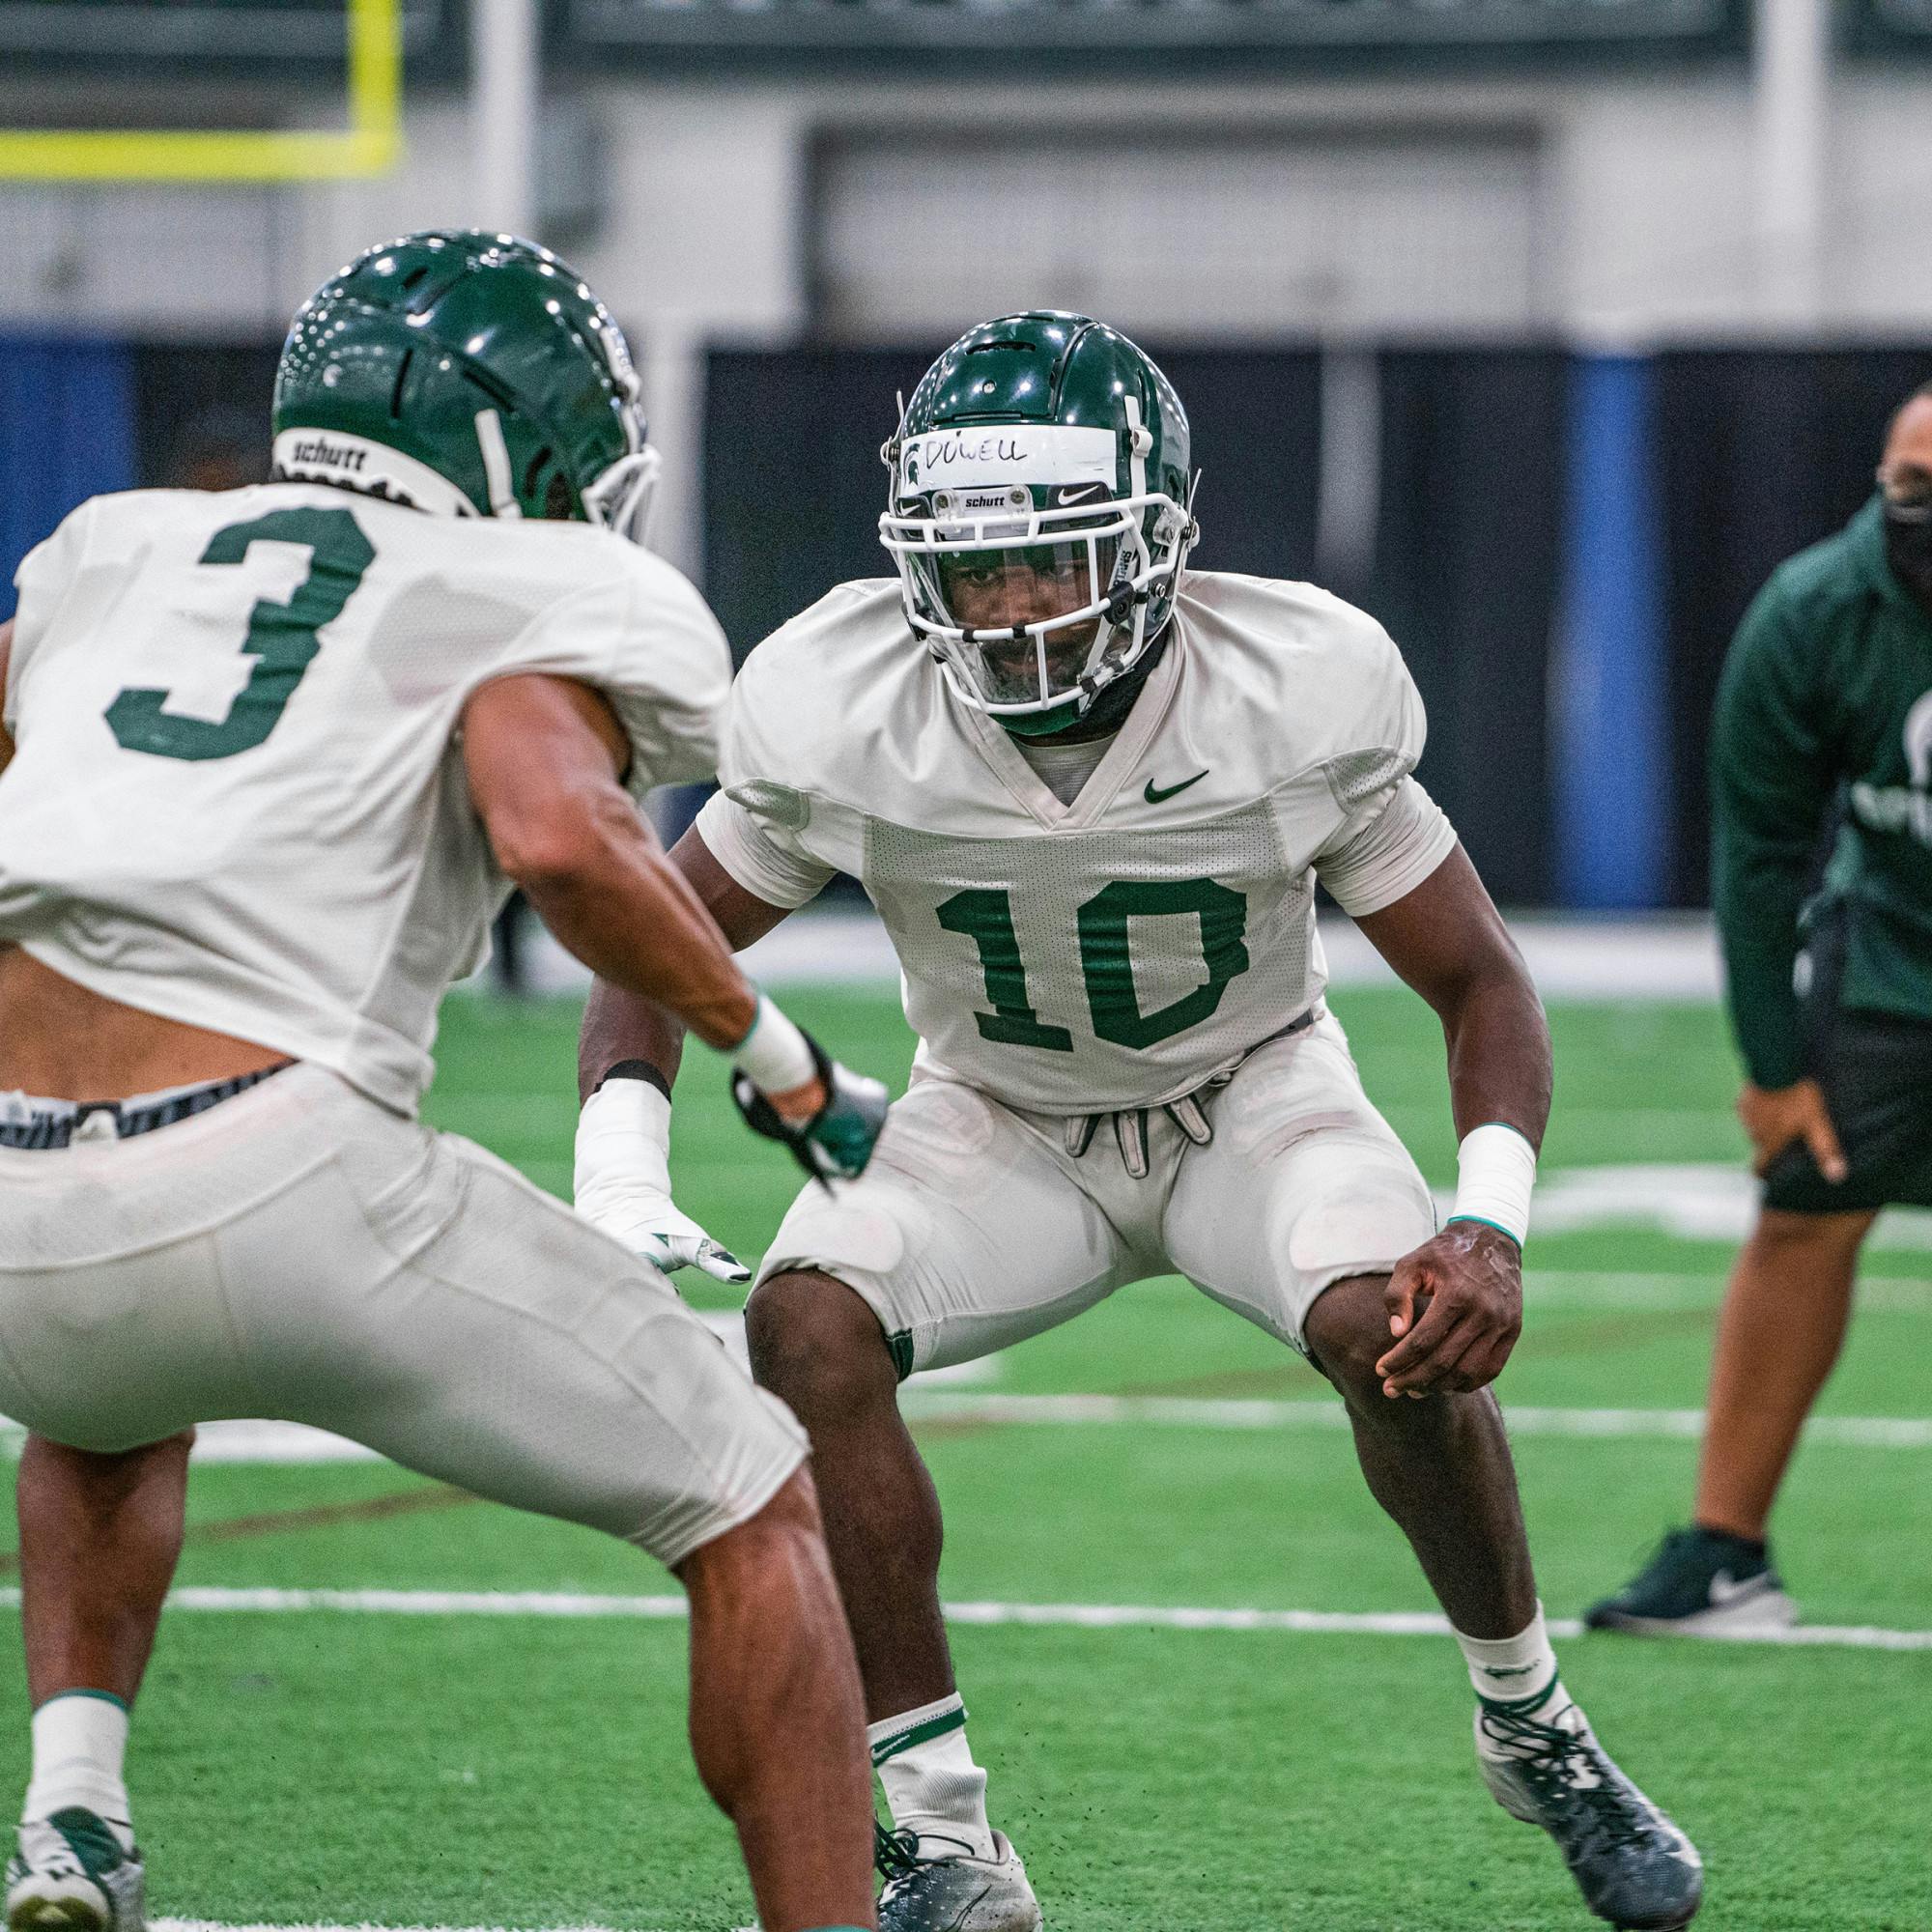 <p>Redshirt sophomore safety Michael Dowell prepares to play defense during practice on Oct. 1, 2020. Dowell is the final of three Dowell brothers to go through the Michigan State football program. </p>